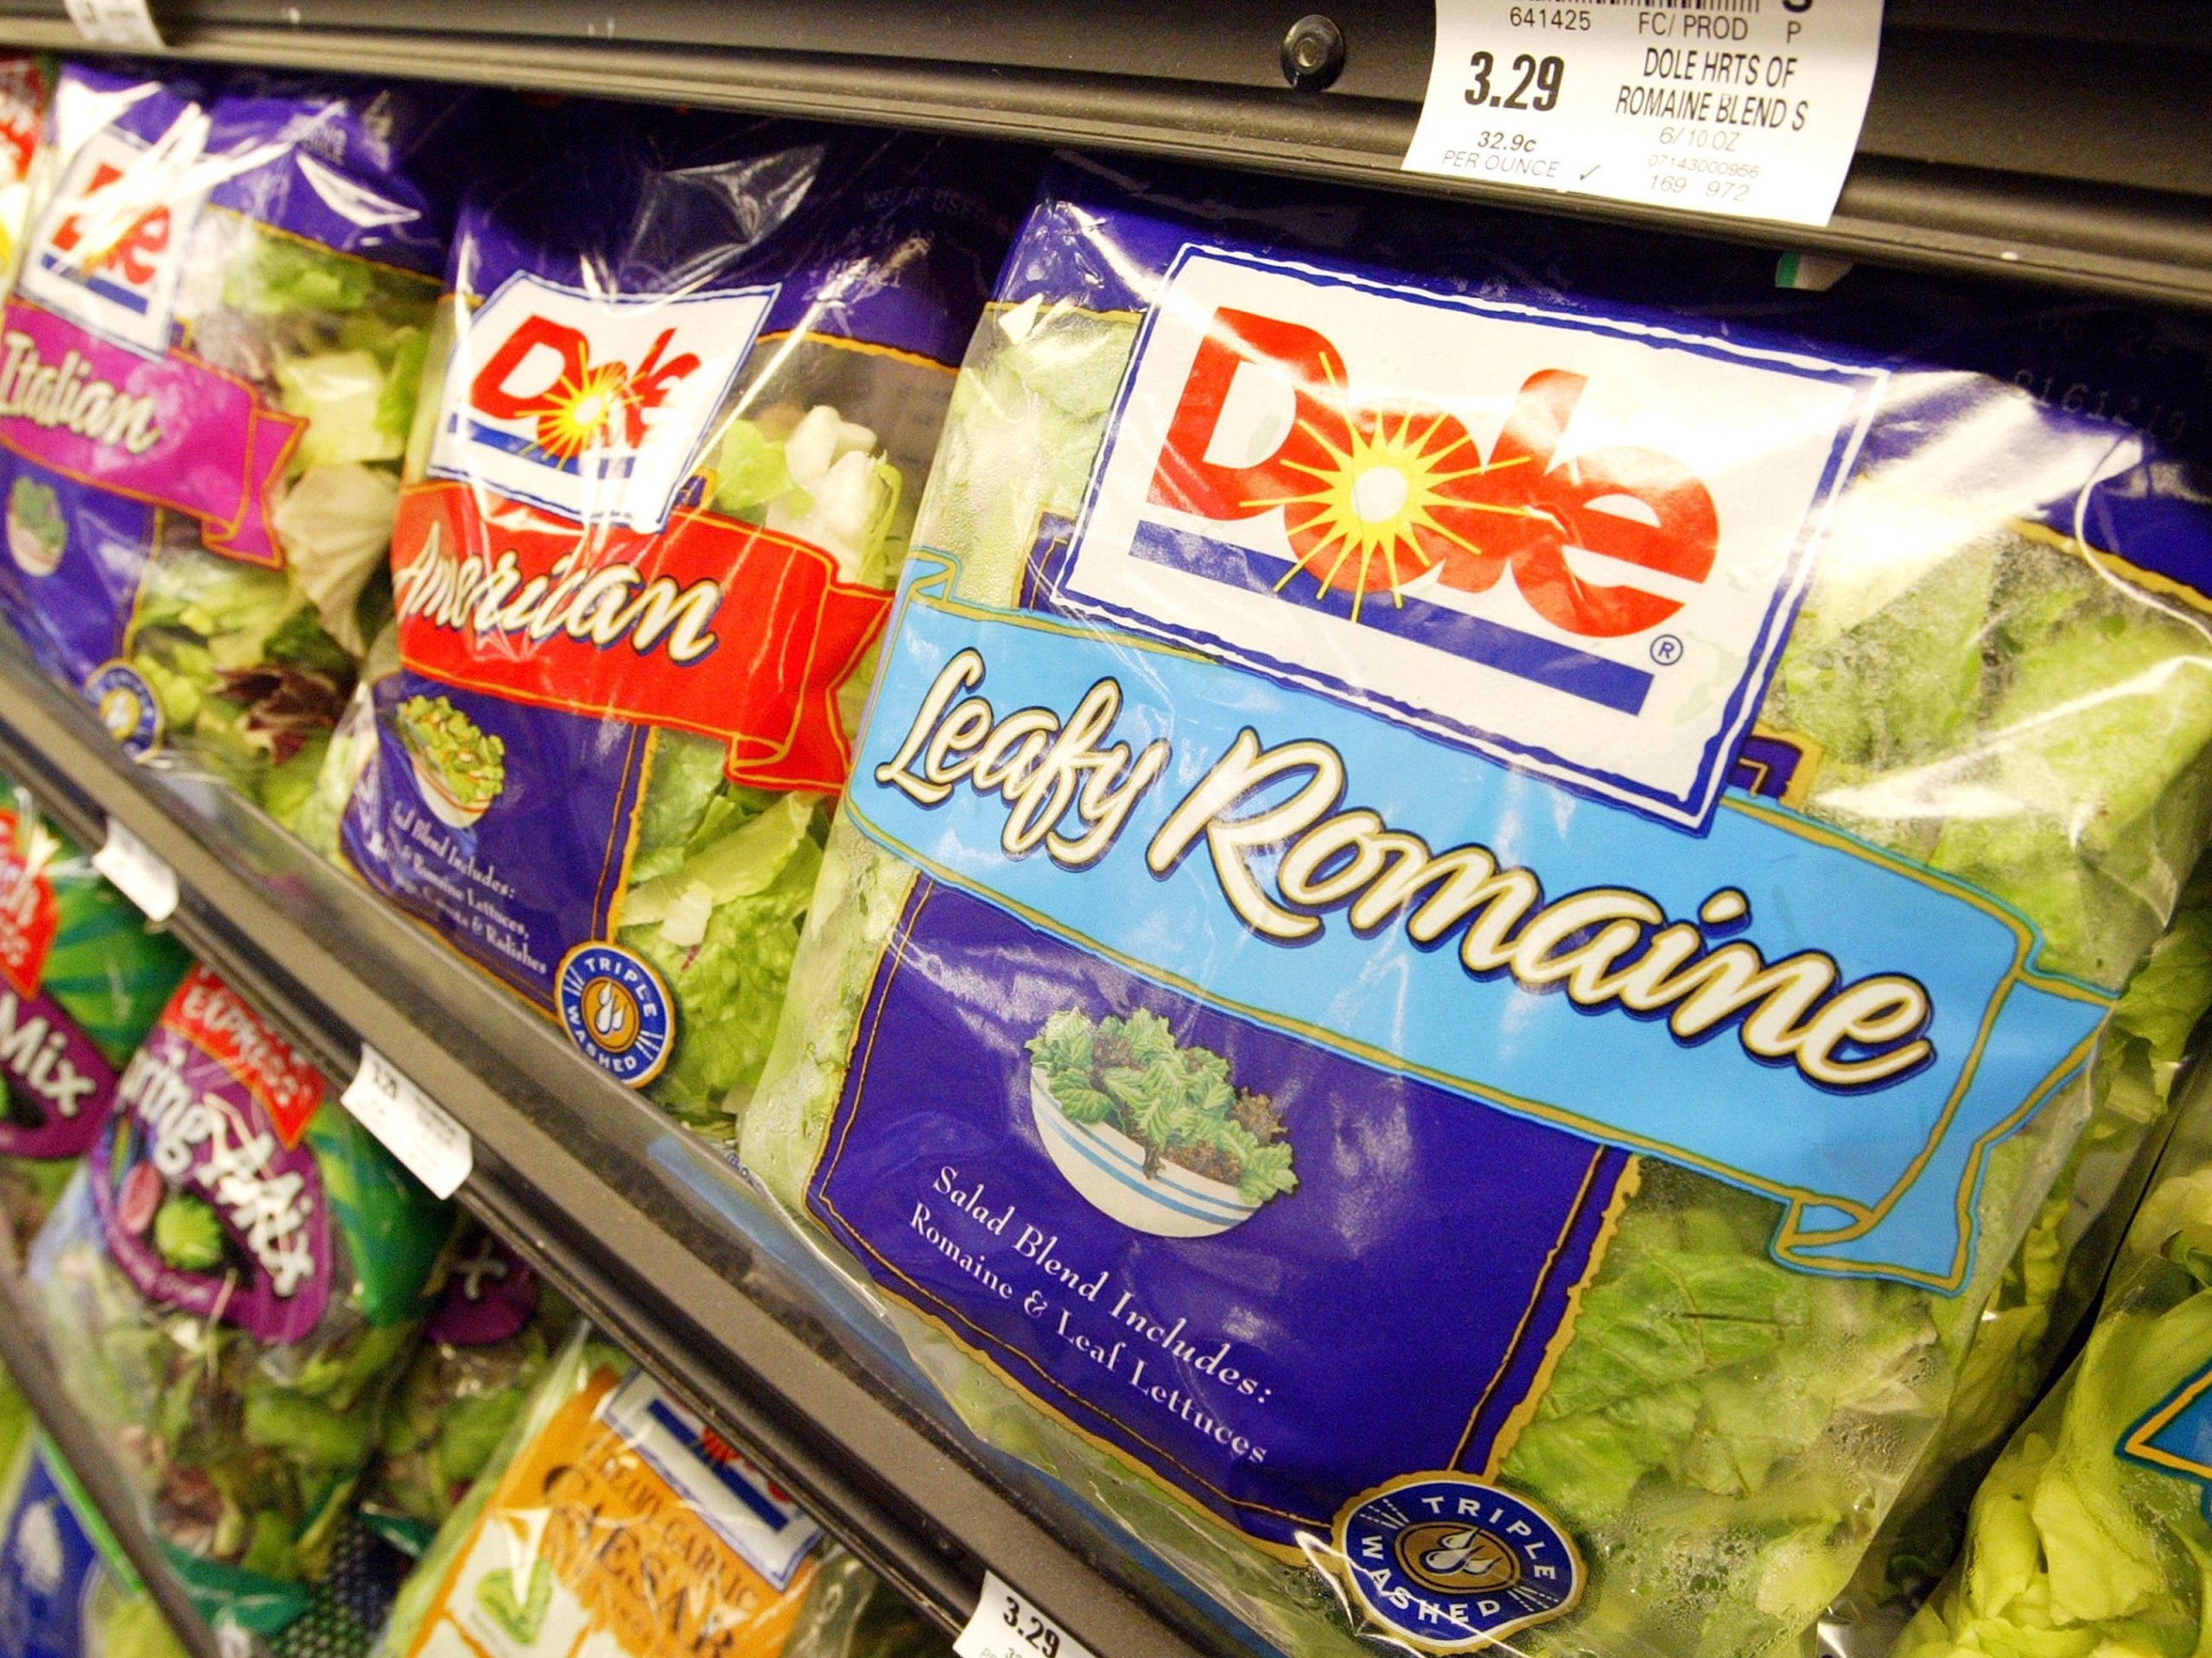 An image of Dole salads in a supermarket.